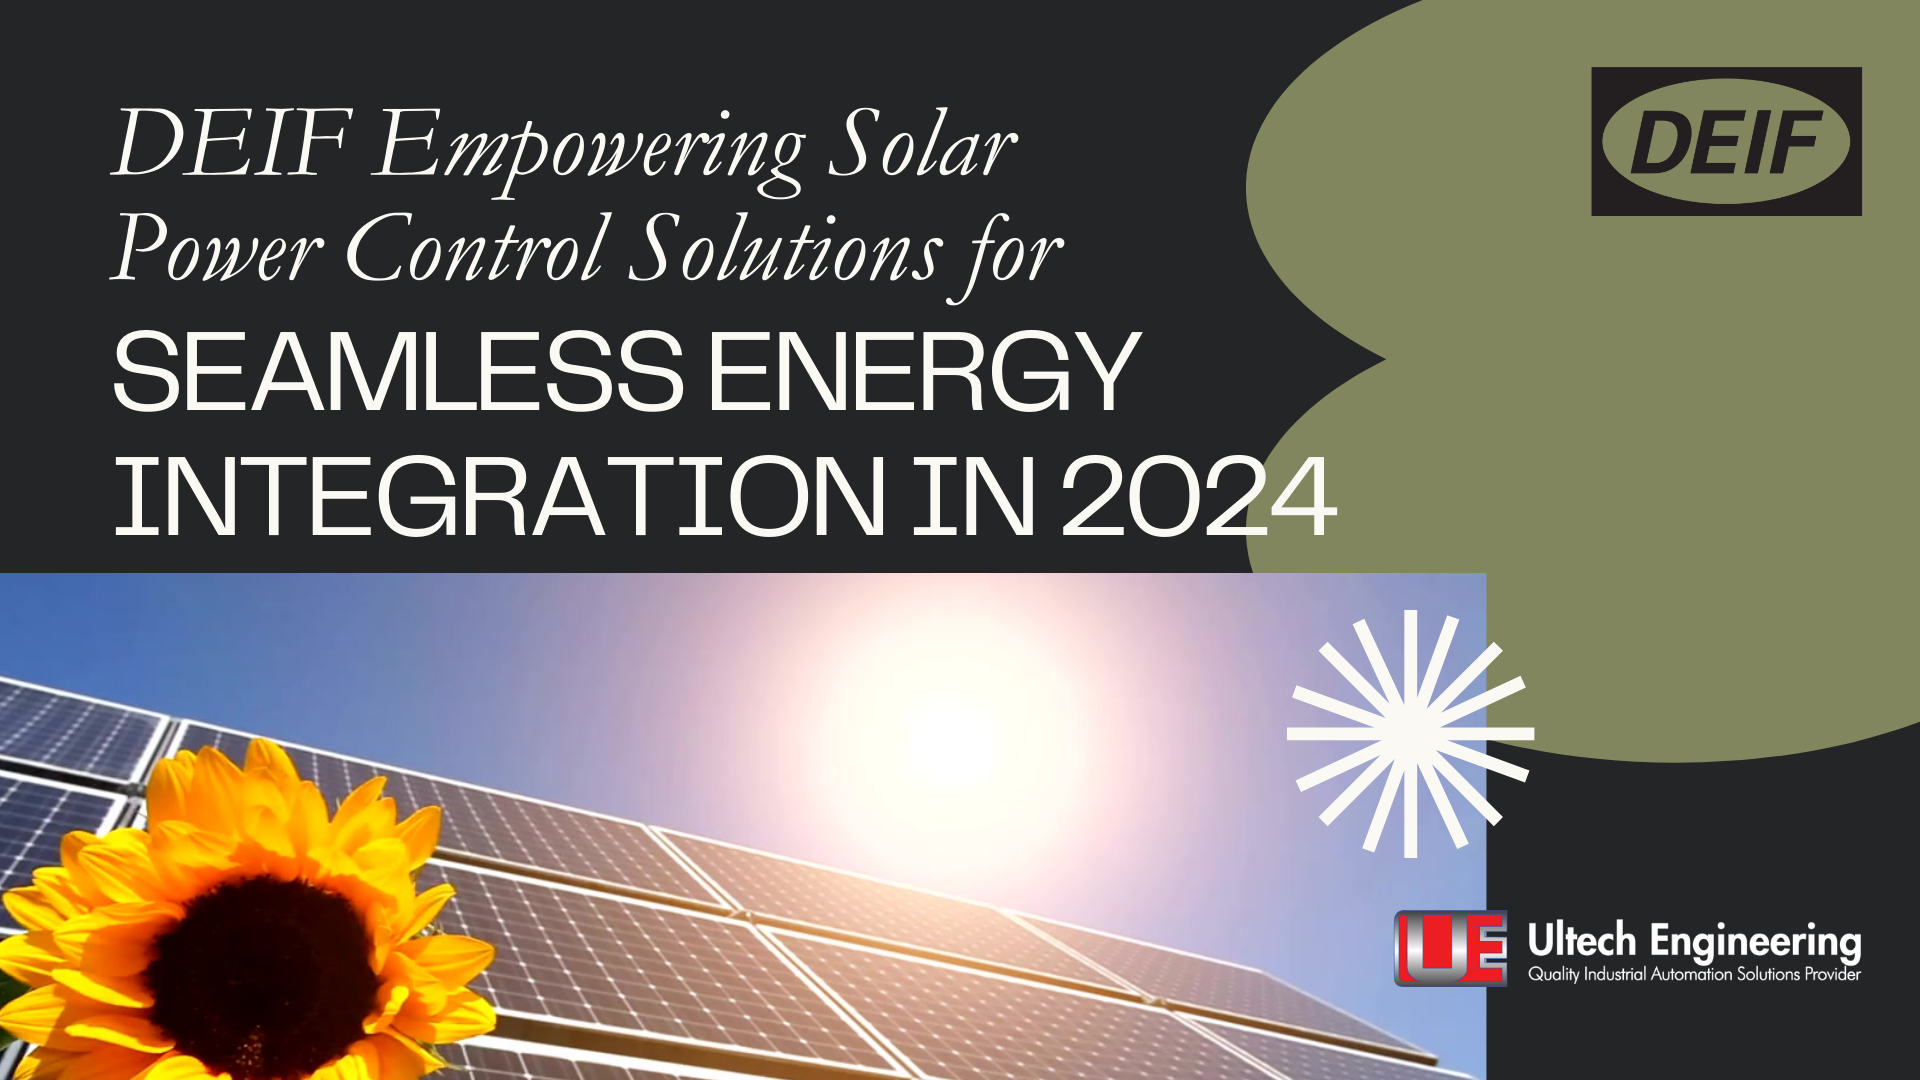 DEIF Empowering Solar Power Control Solutions for Seamless Energy Integration in 2024